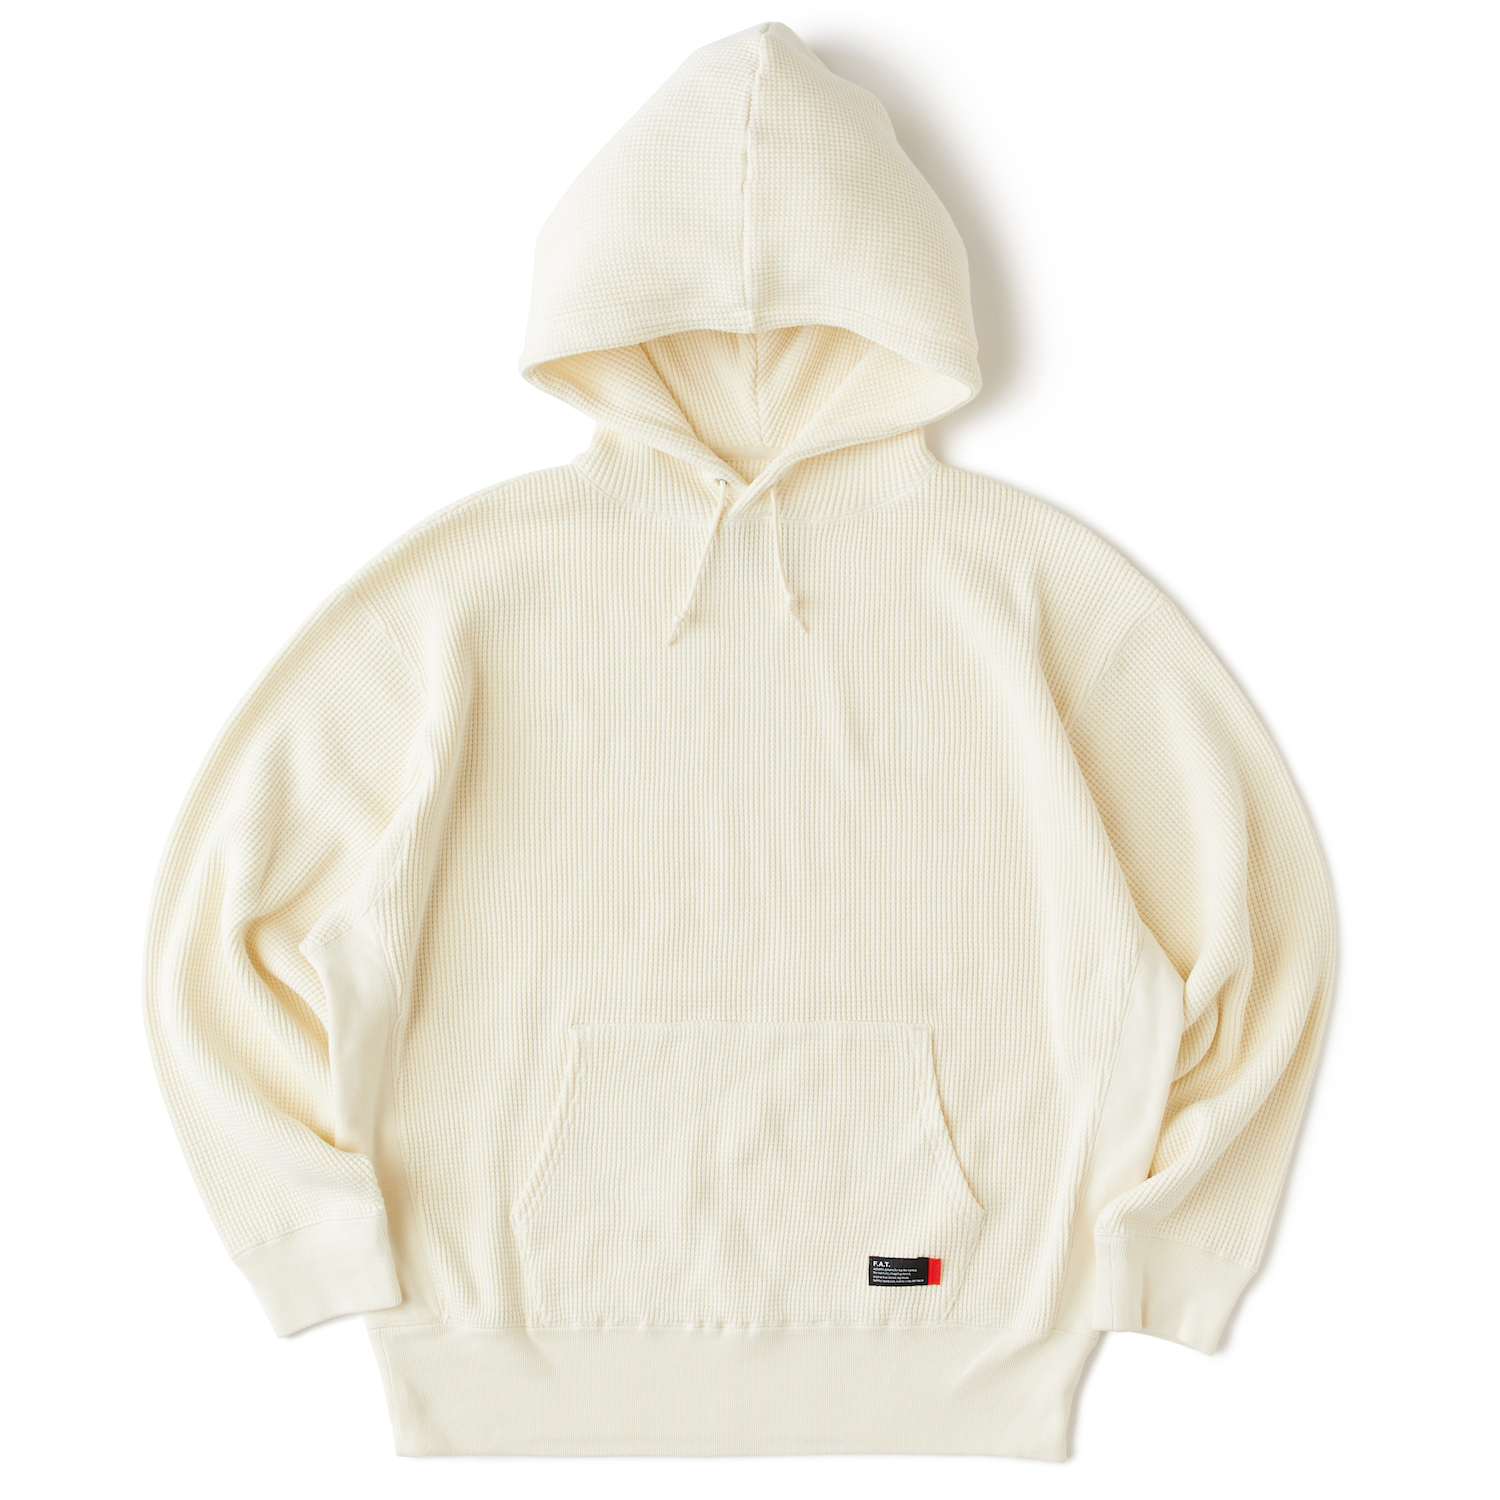 HEALTHERMAL 詳細画像 OFFWHITE 1